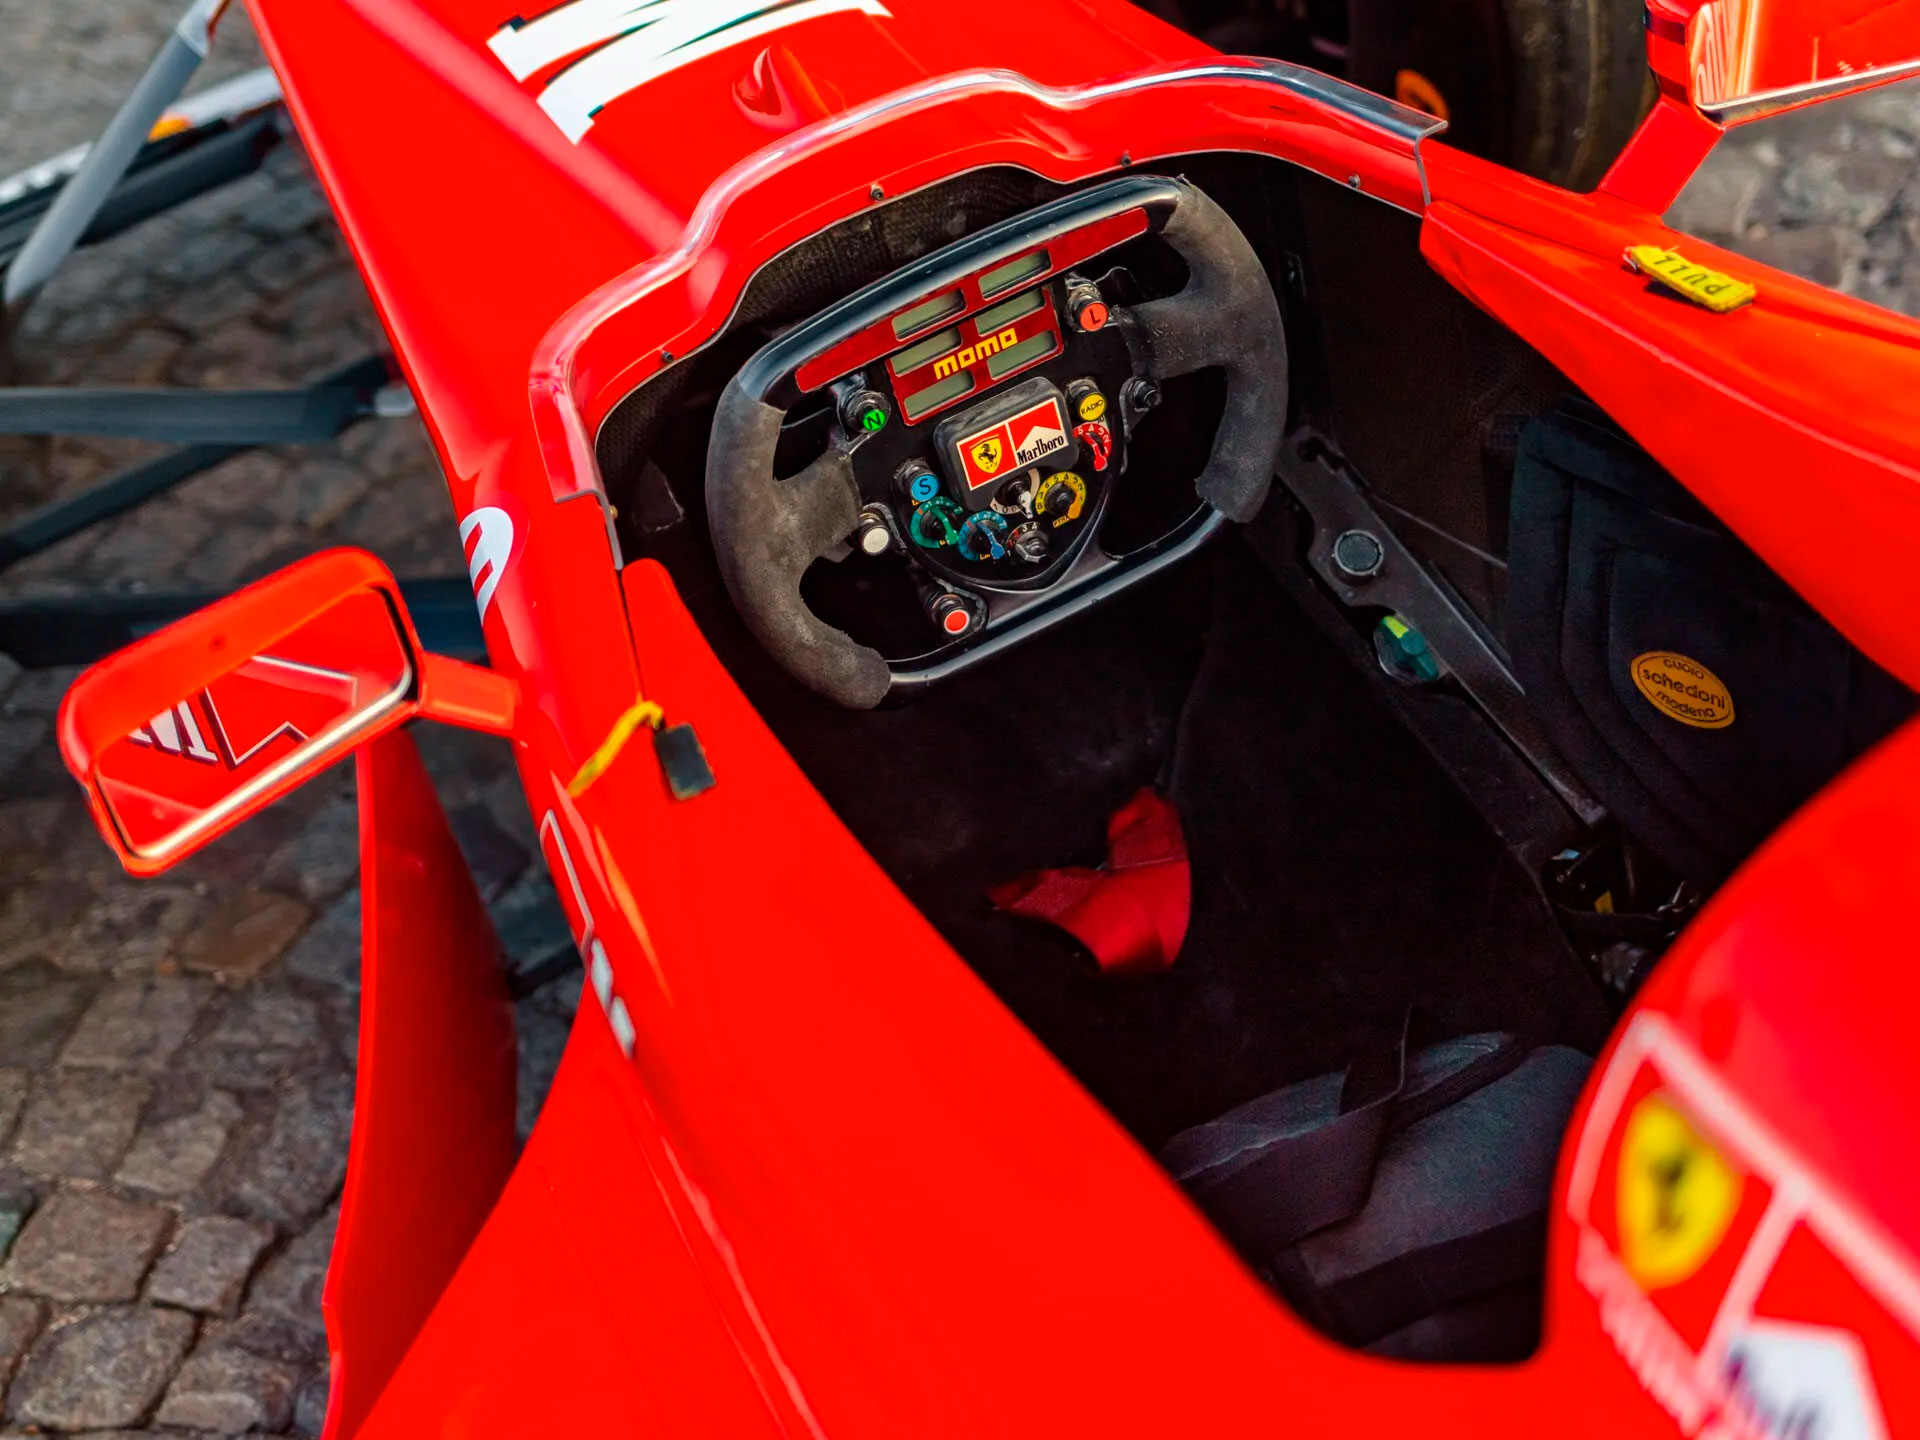 This is the interior of the F300-187 that Schumacher drove (rmsothebys)